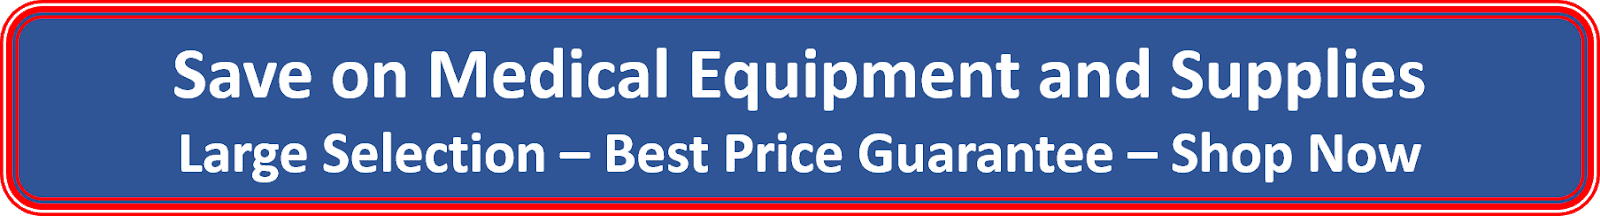  Save Money on Medical Equipment and Medical Supplies